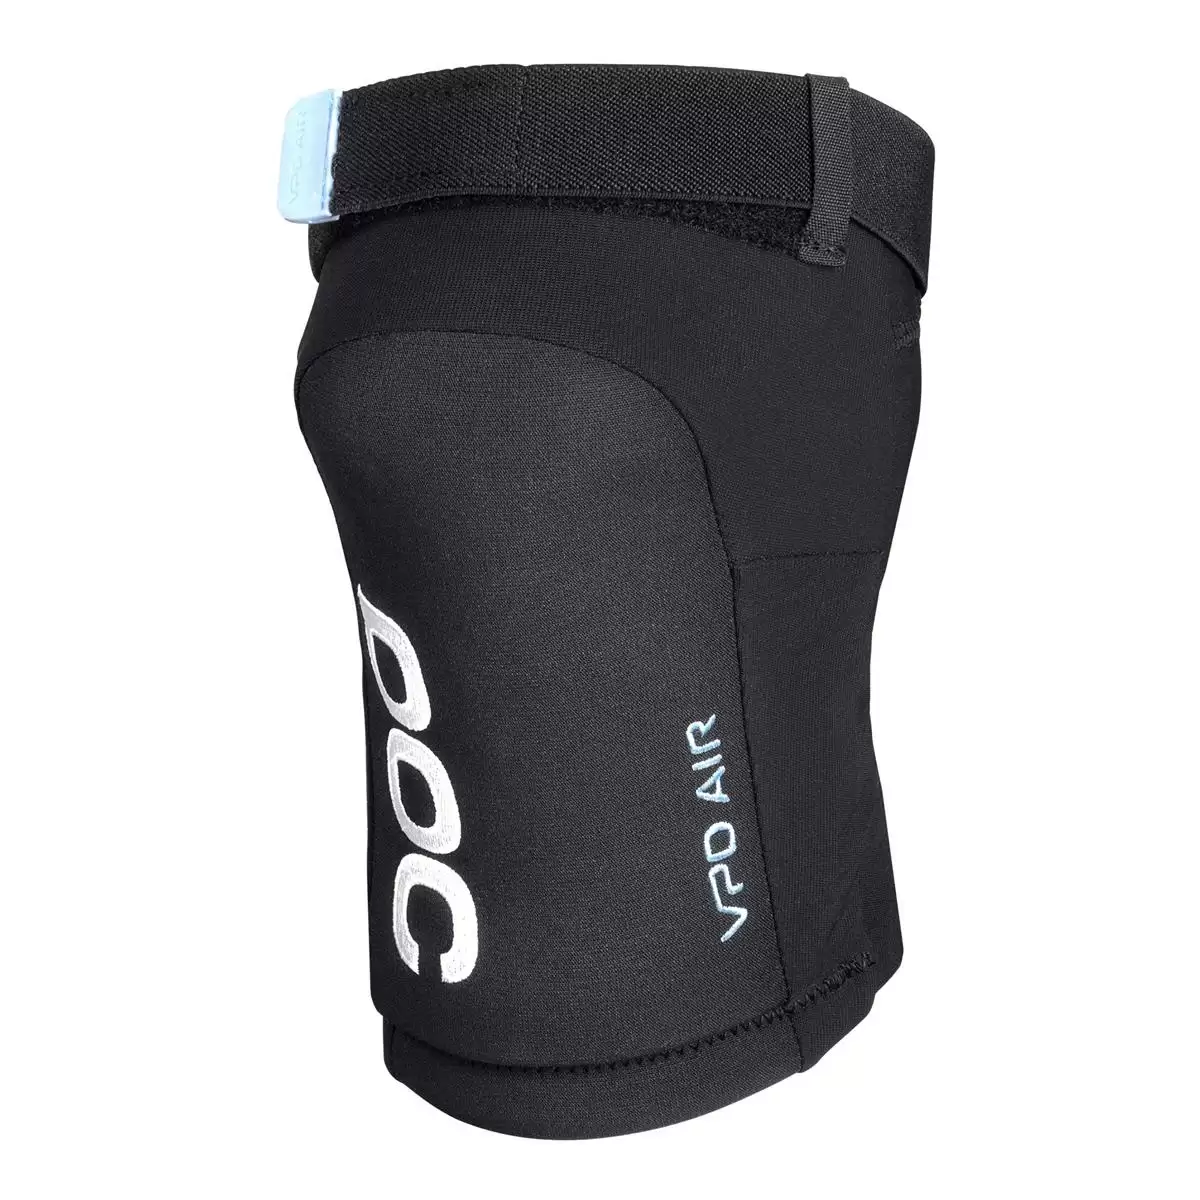 Joint VPD Air Knee pads black Size XS #1